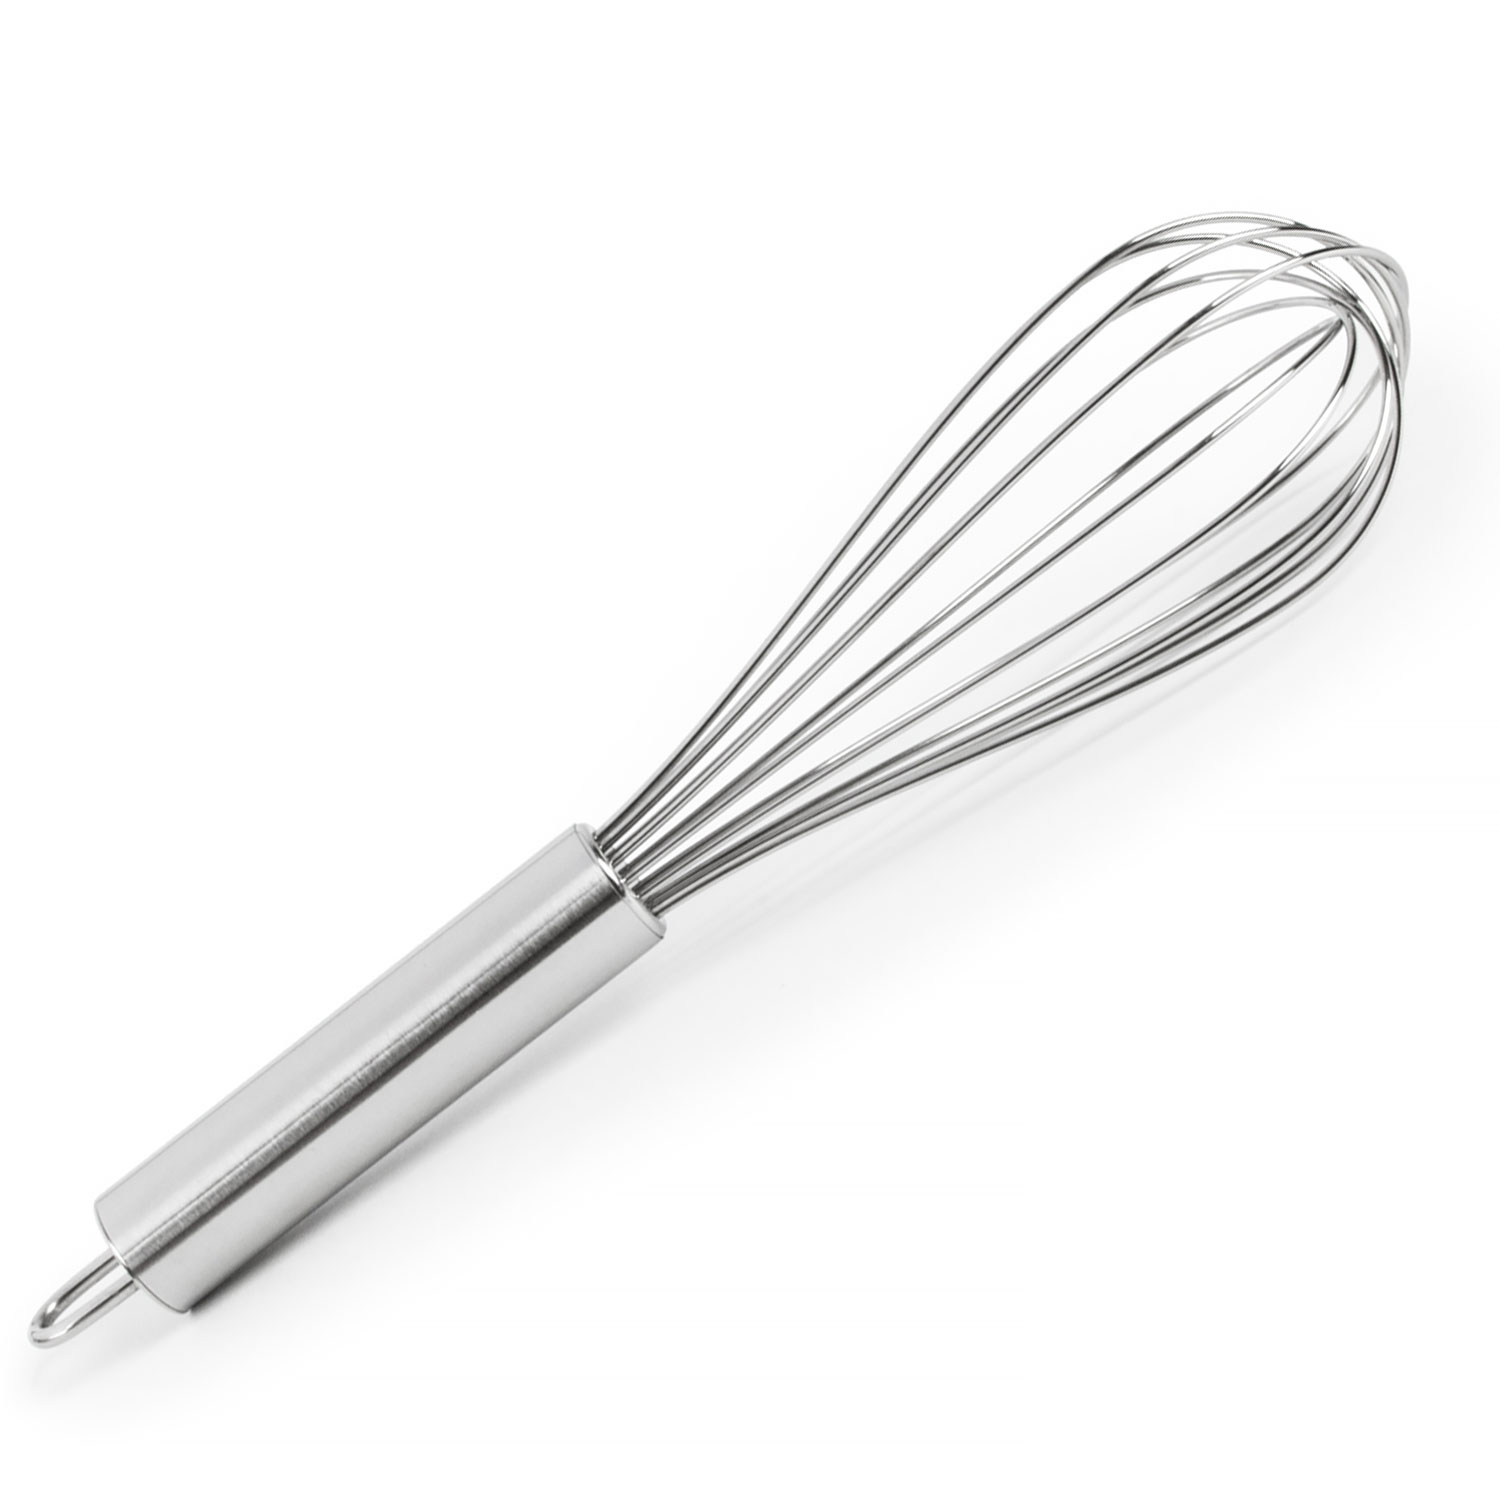 Custom Stainless Steel Whisk, Kitchen Whisk, Personalized Whisk